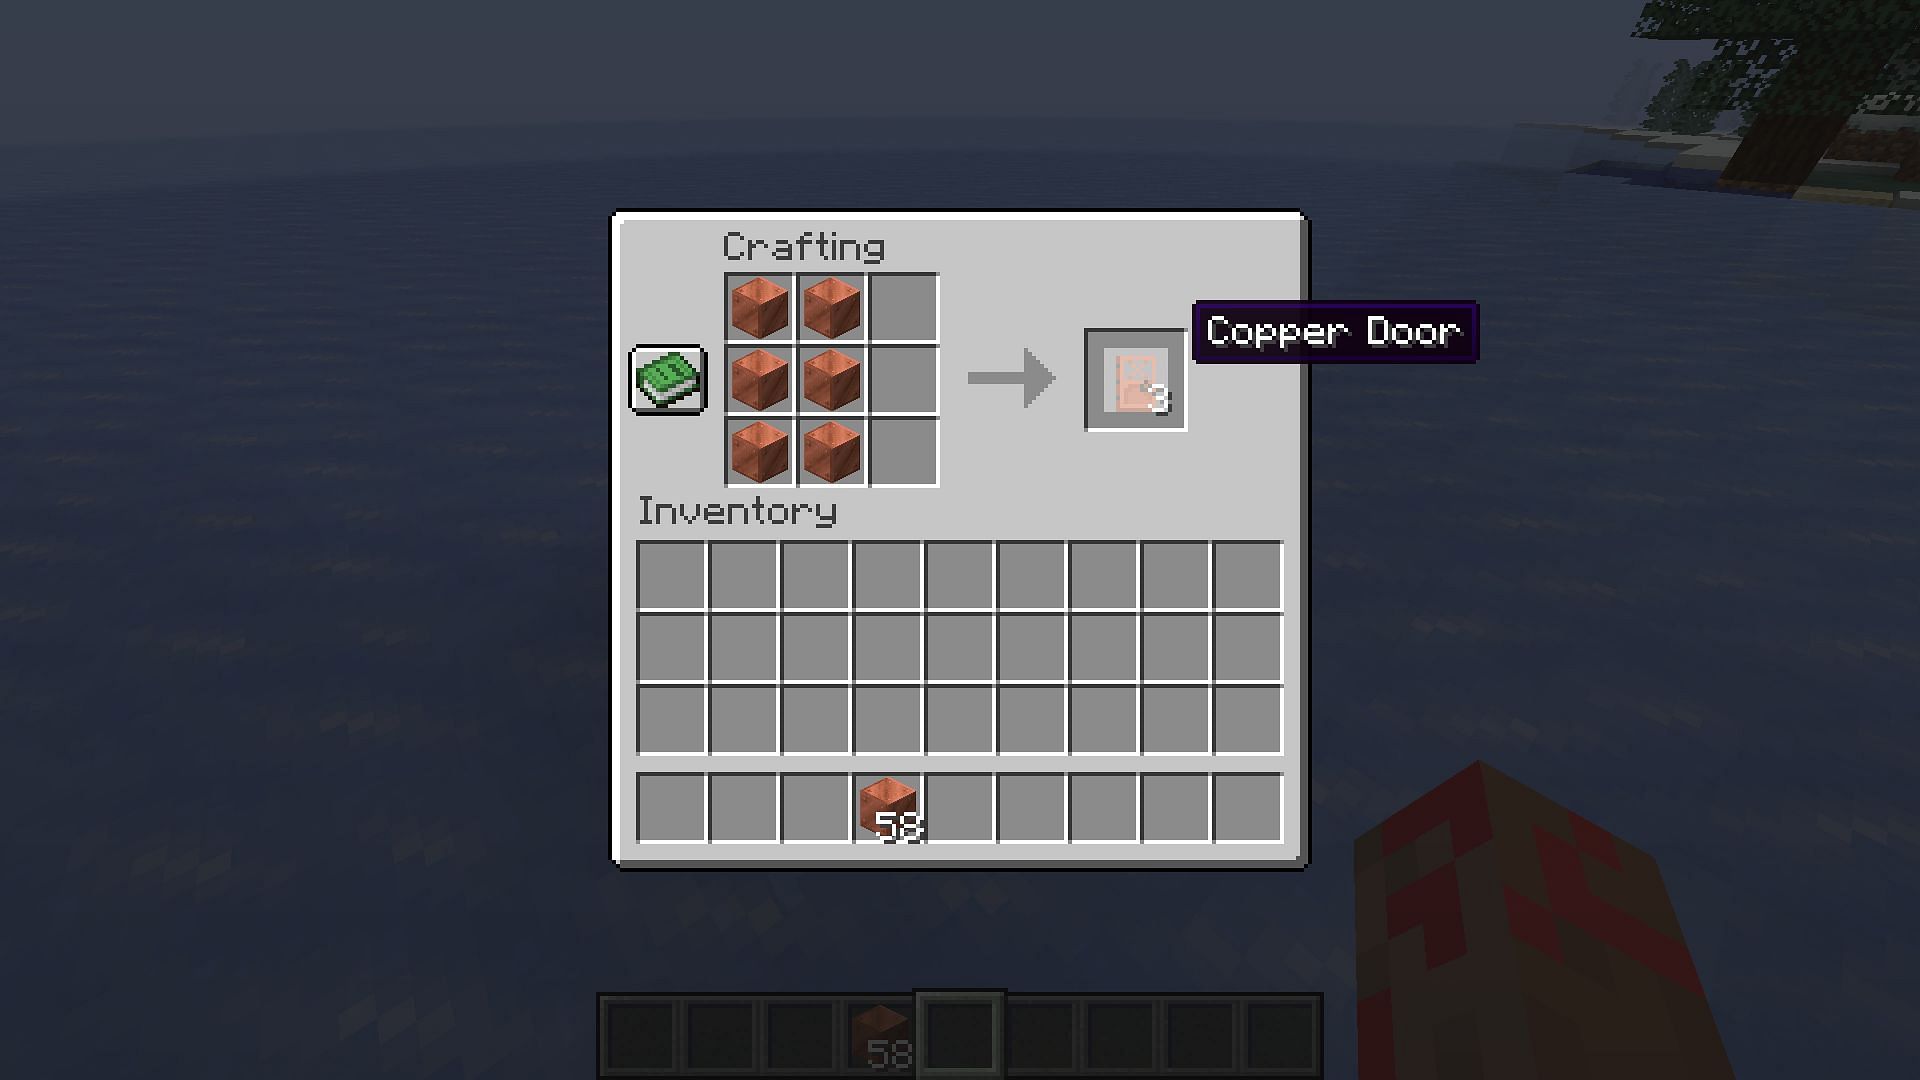 Copper doors can be crafted using six blocks of copper in Minecraft (Image via Mojang)